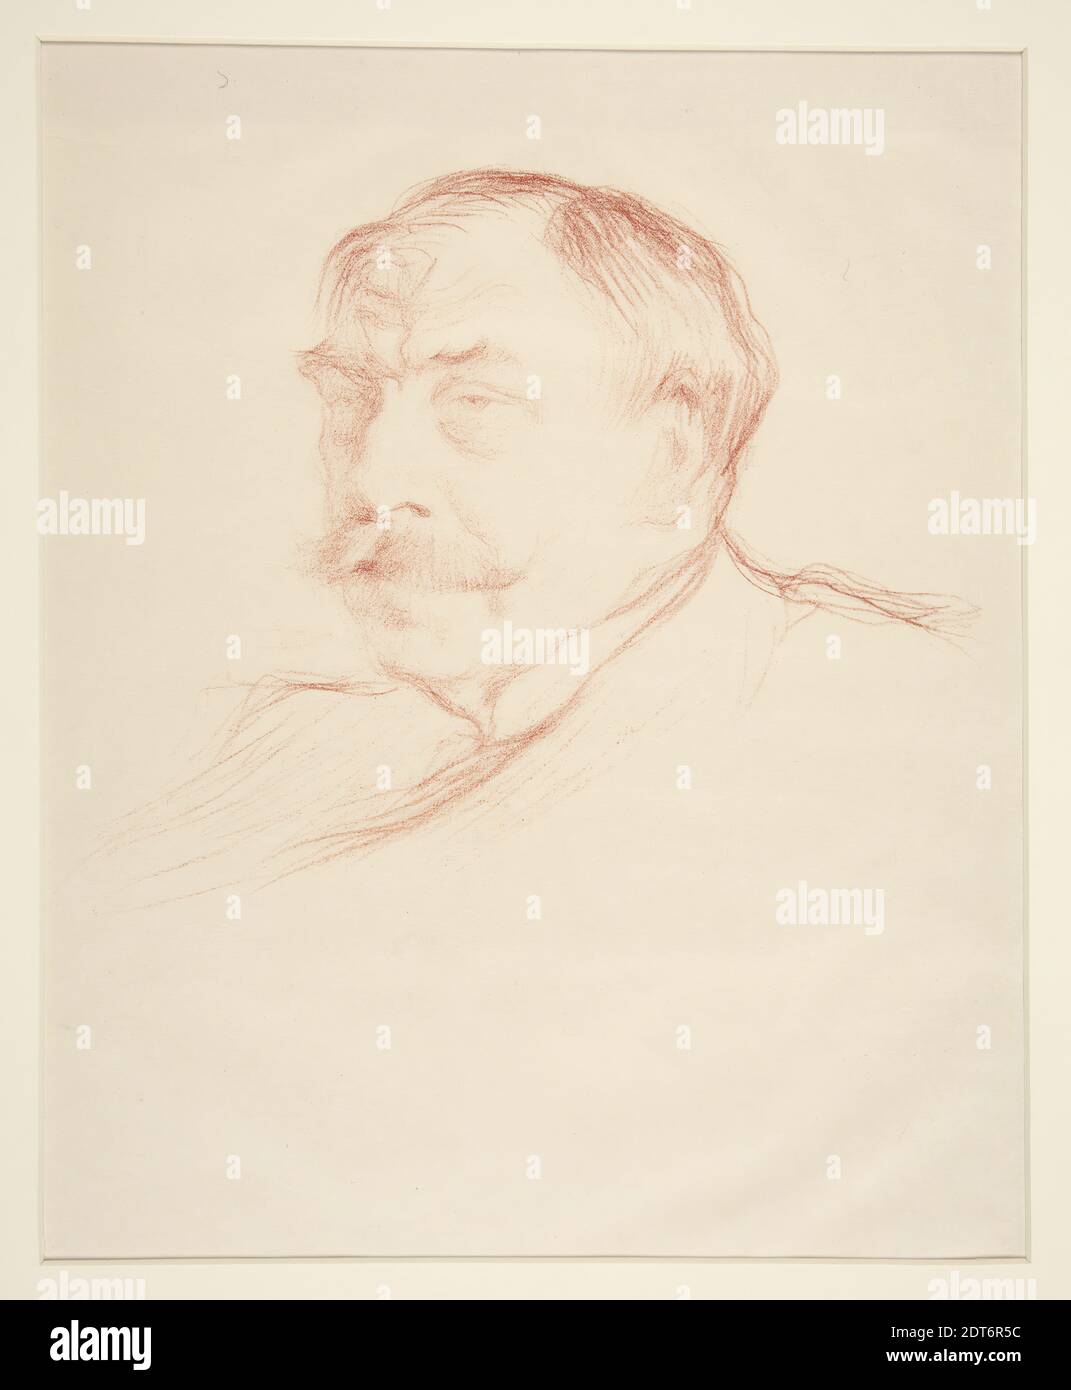 Artist: Henry Bataille, ca. 1846–1943, Portrait of Mirbeau, Lithograph, sheet: 43.82 × 29.05 cm (17 1/4 × 11 7/16 in.), French, 19th century, Works on Paper - Prints Stock Photo